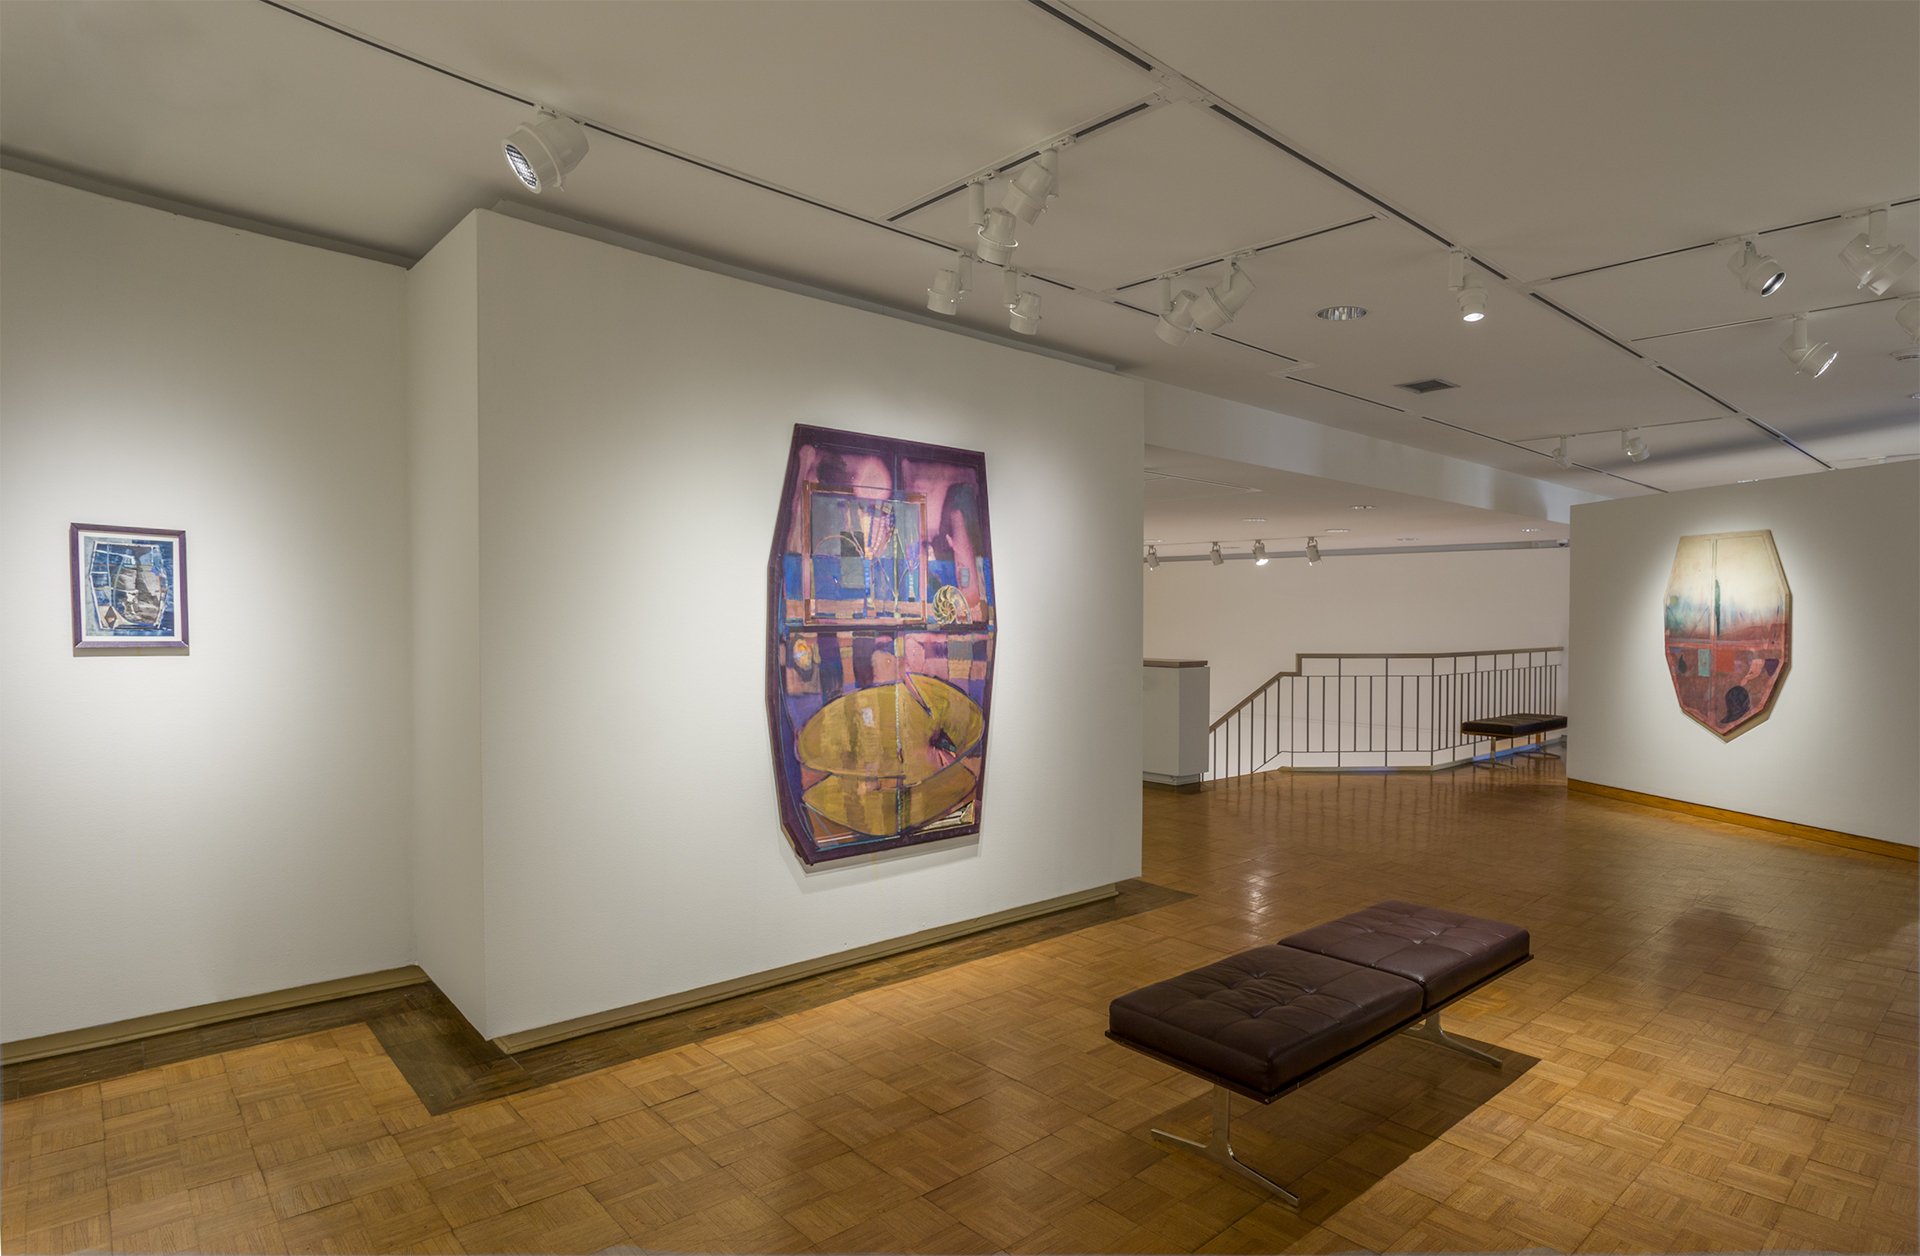  Installation image, Trout Gallery at Dickinson College, 2022 